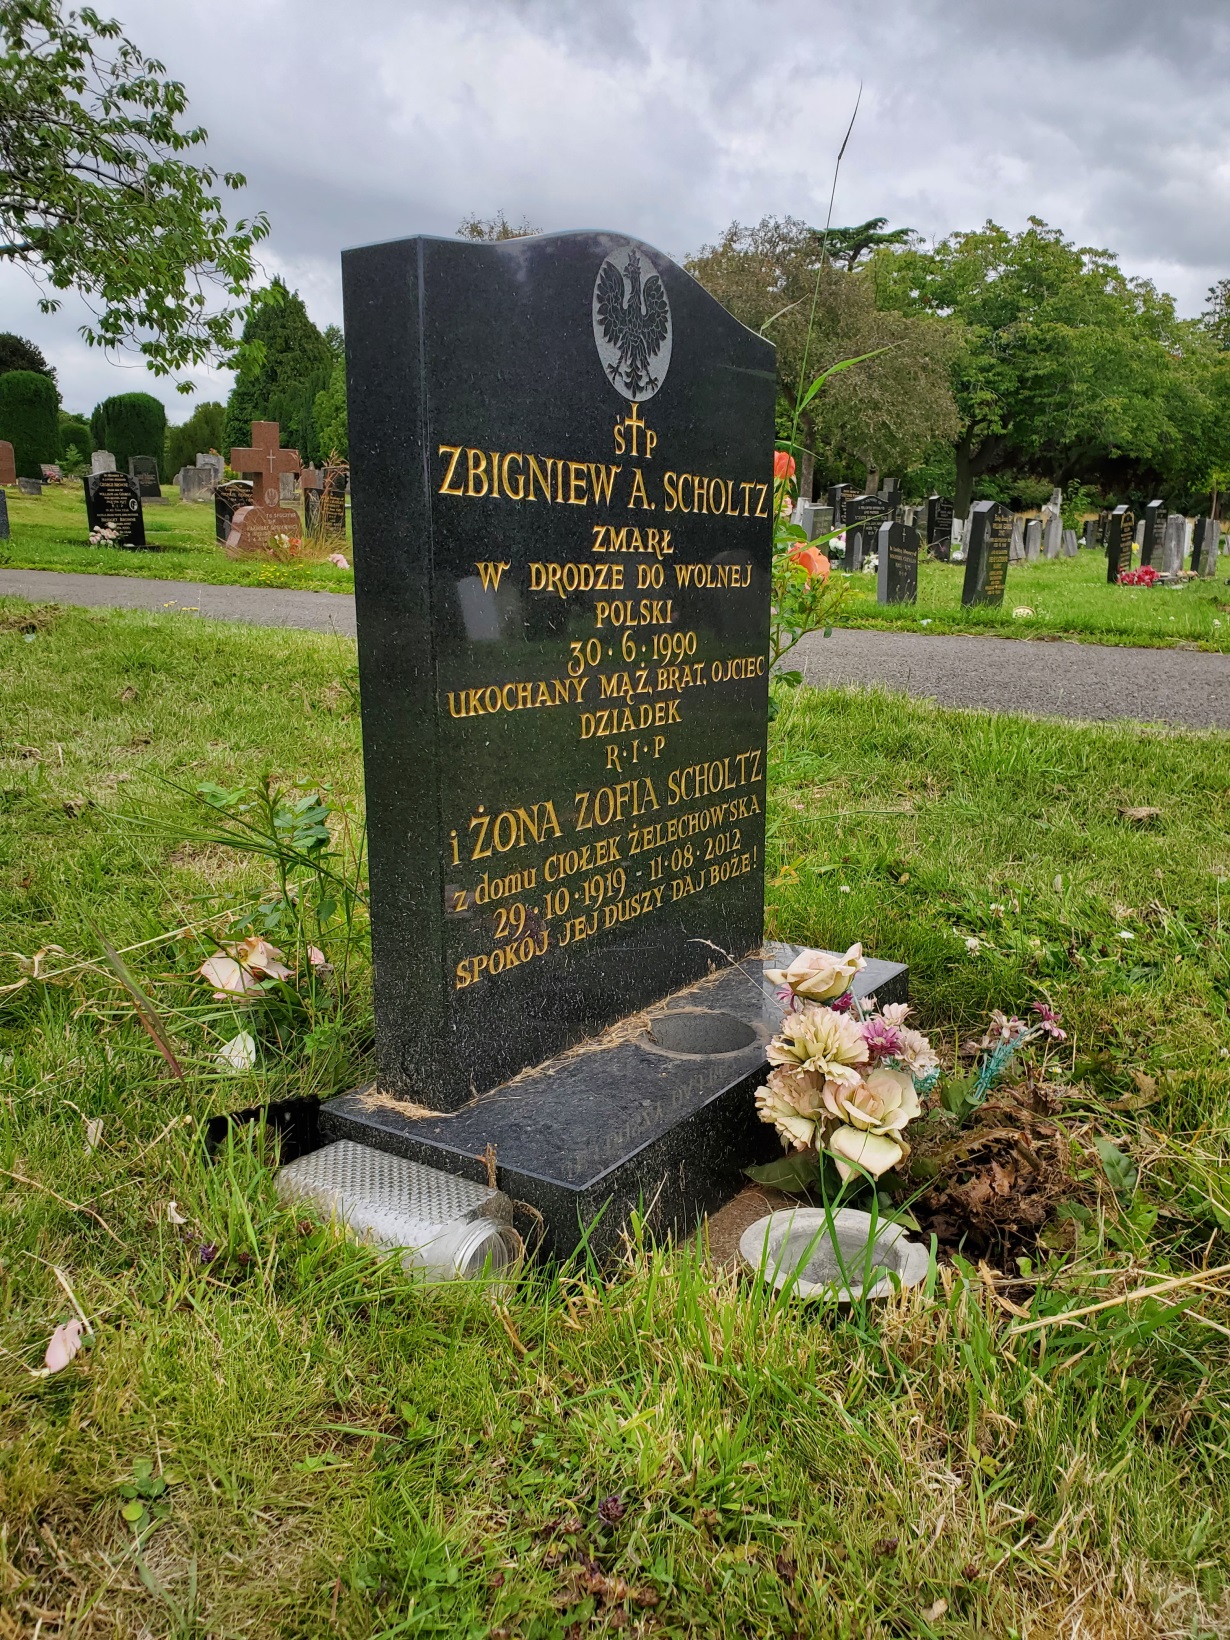 Tombstone of Zbigniew and Sophie Scholtz